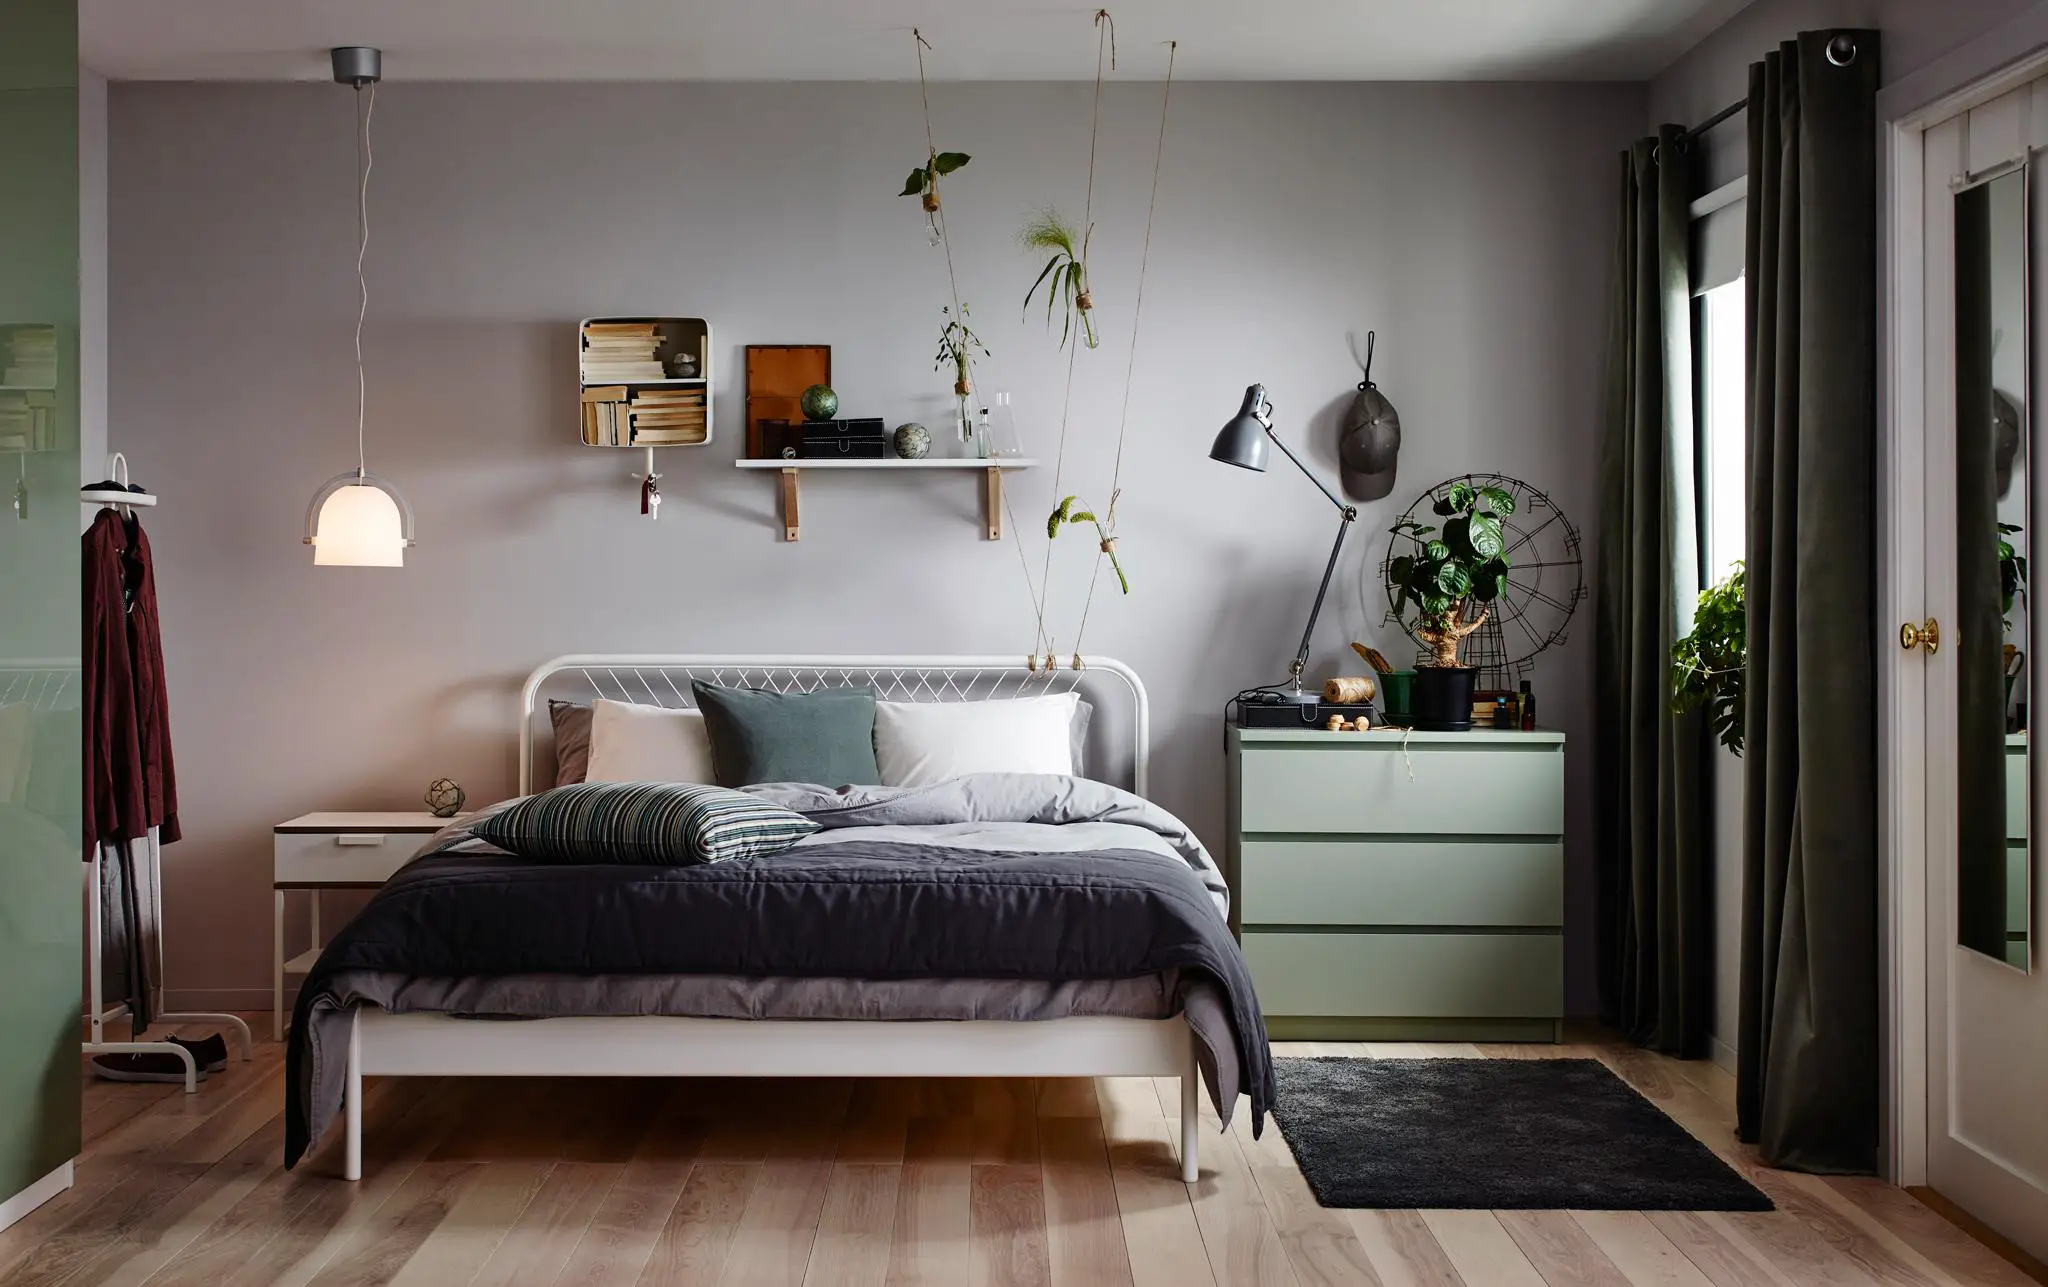 How to organize a small bedroom to create the impression of more space